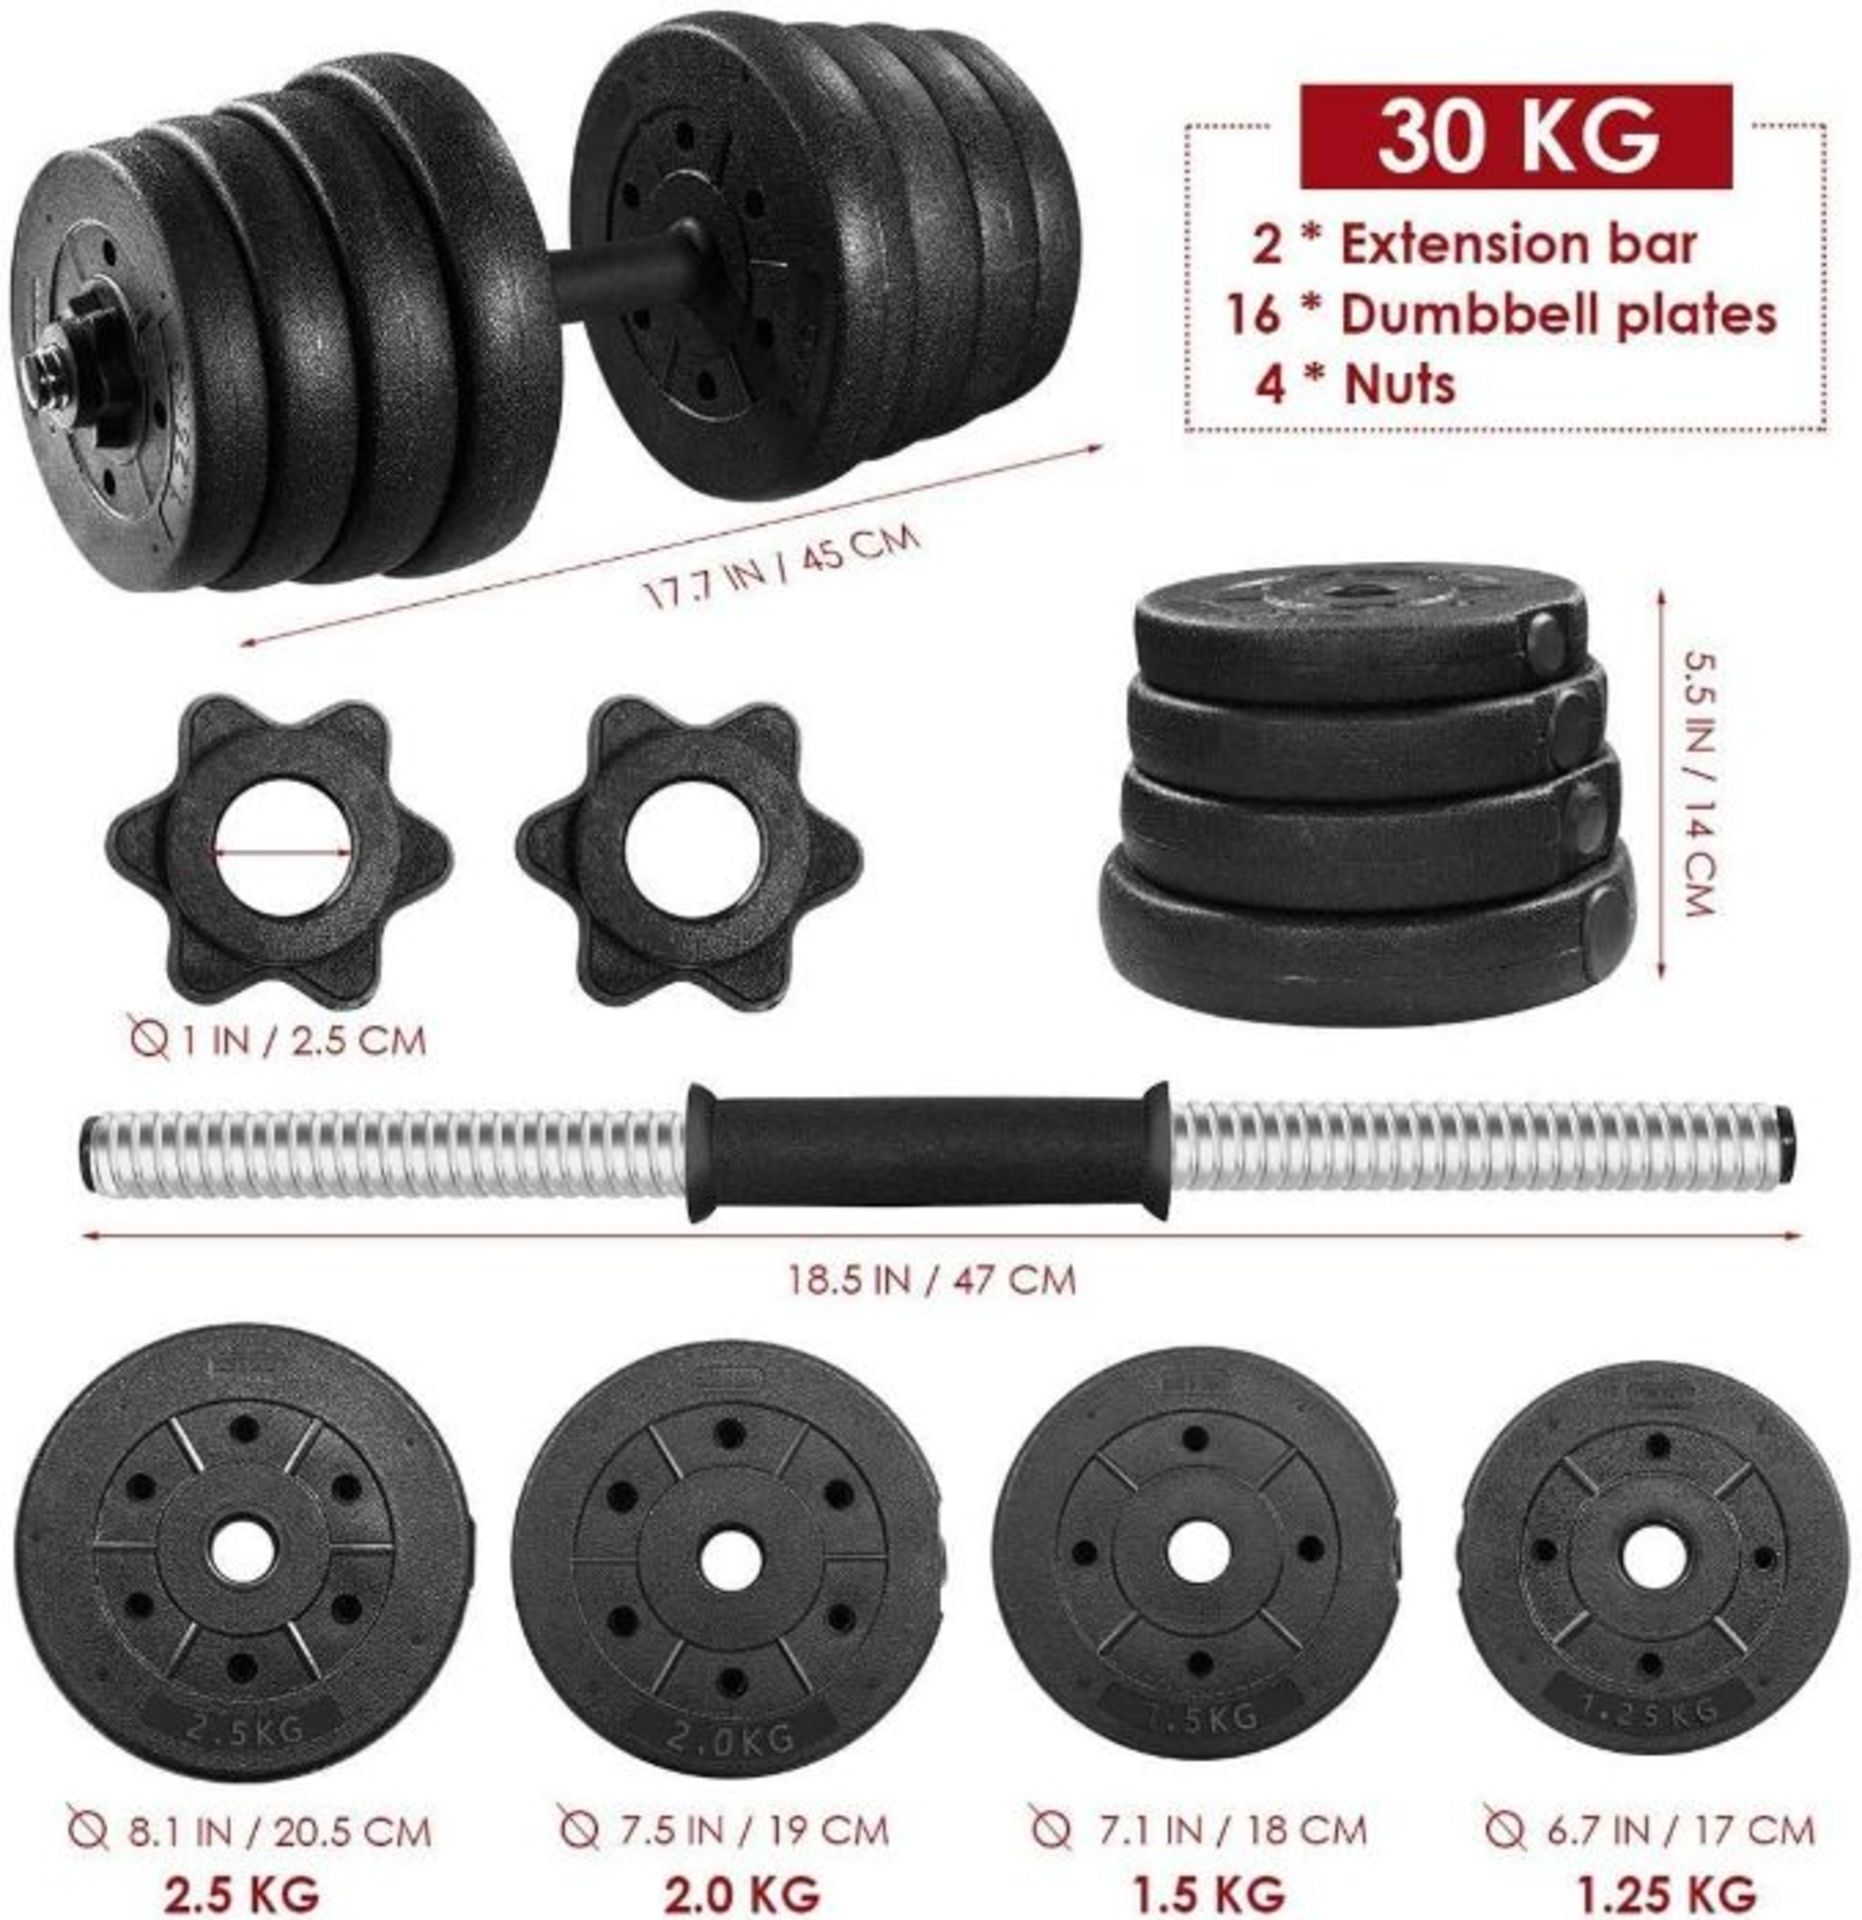 10x Movtotop 30KG adjustable Dumb Bell weight set, new and boxed, we can only find these in - Image 2 of 8